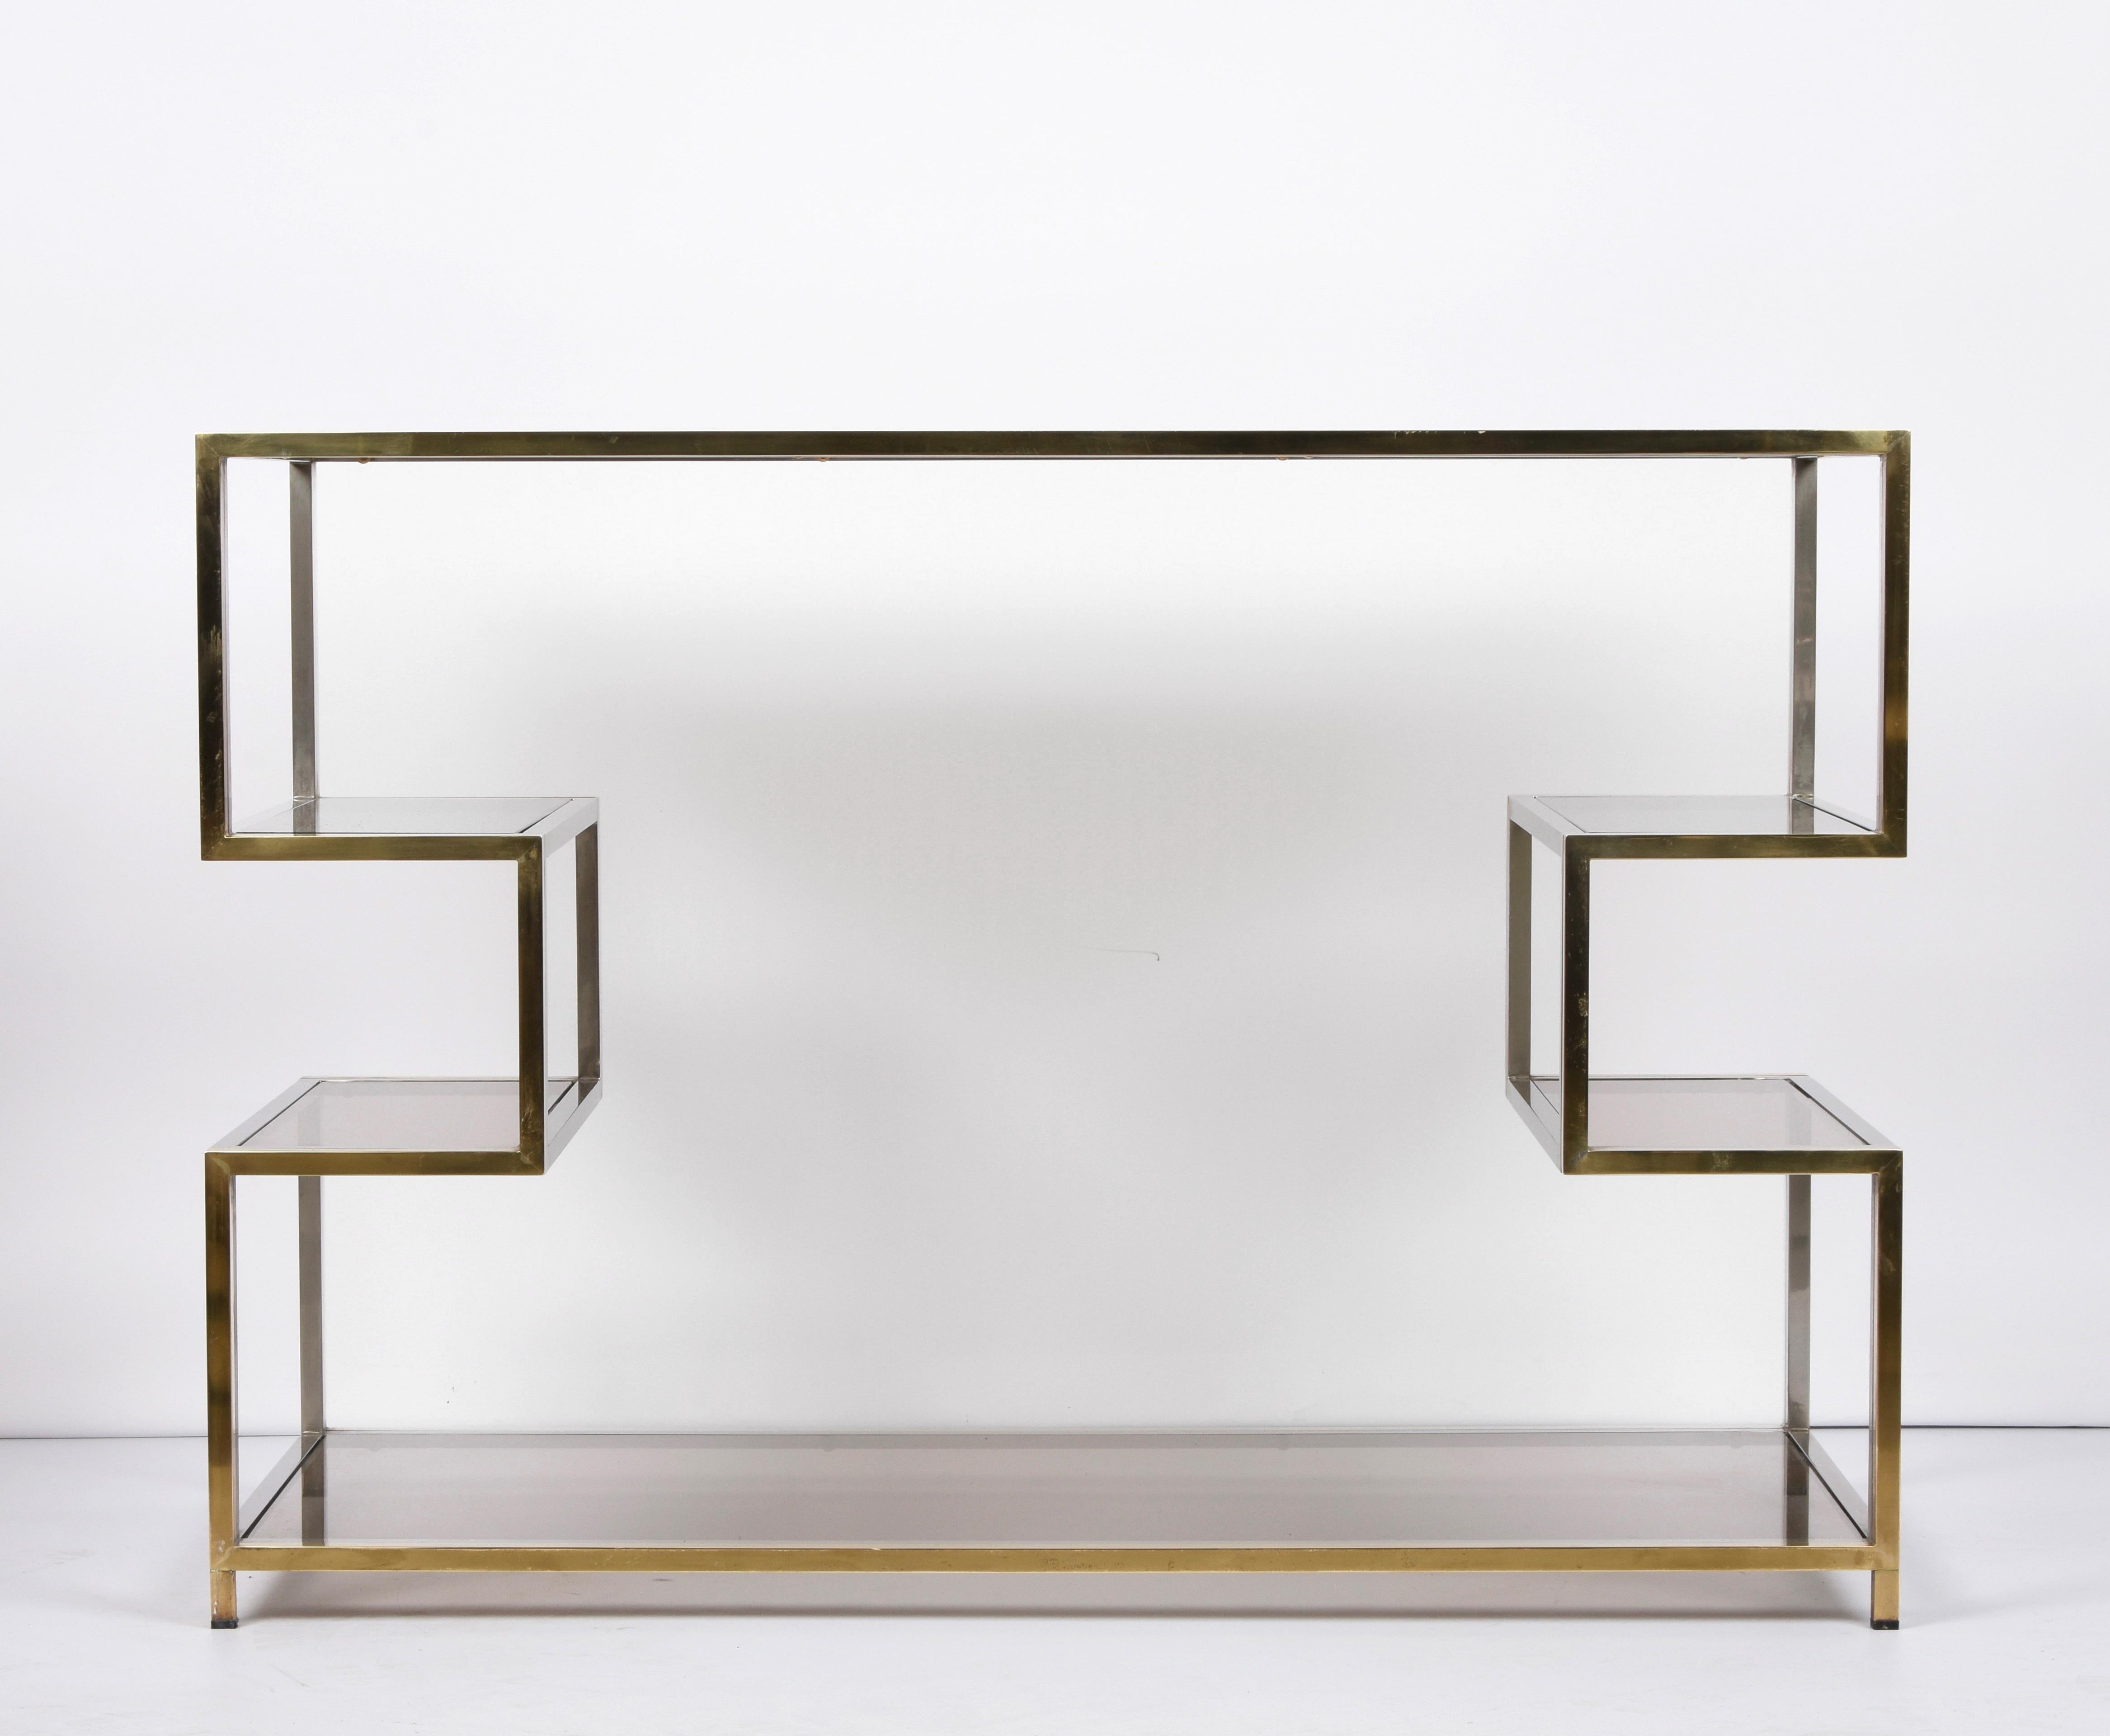 Midcentury Gold Brass and Glass Italian Console Table in Romeo Rega Style, 1970s For Sale 2